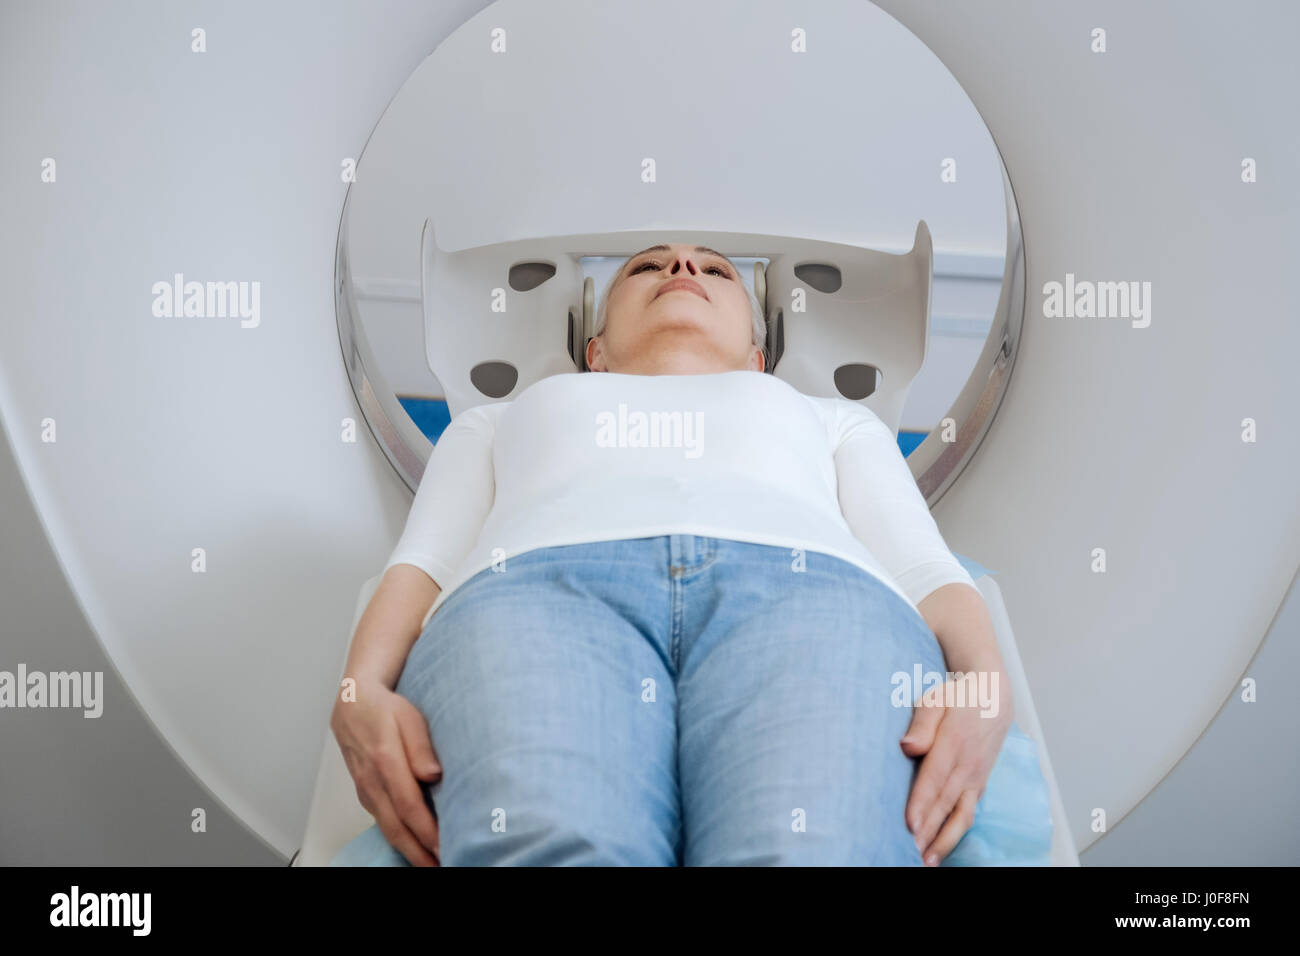 Serious worried patient lying on the examination table Stock Photo